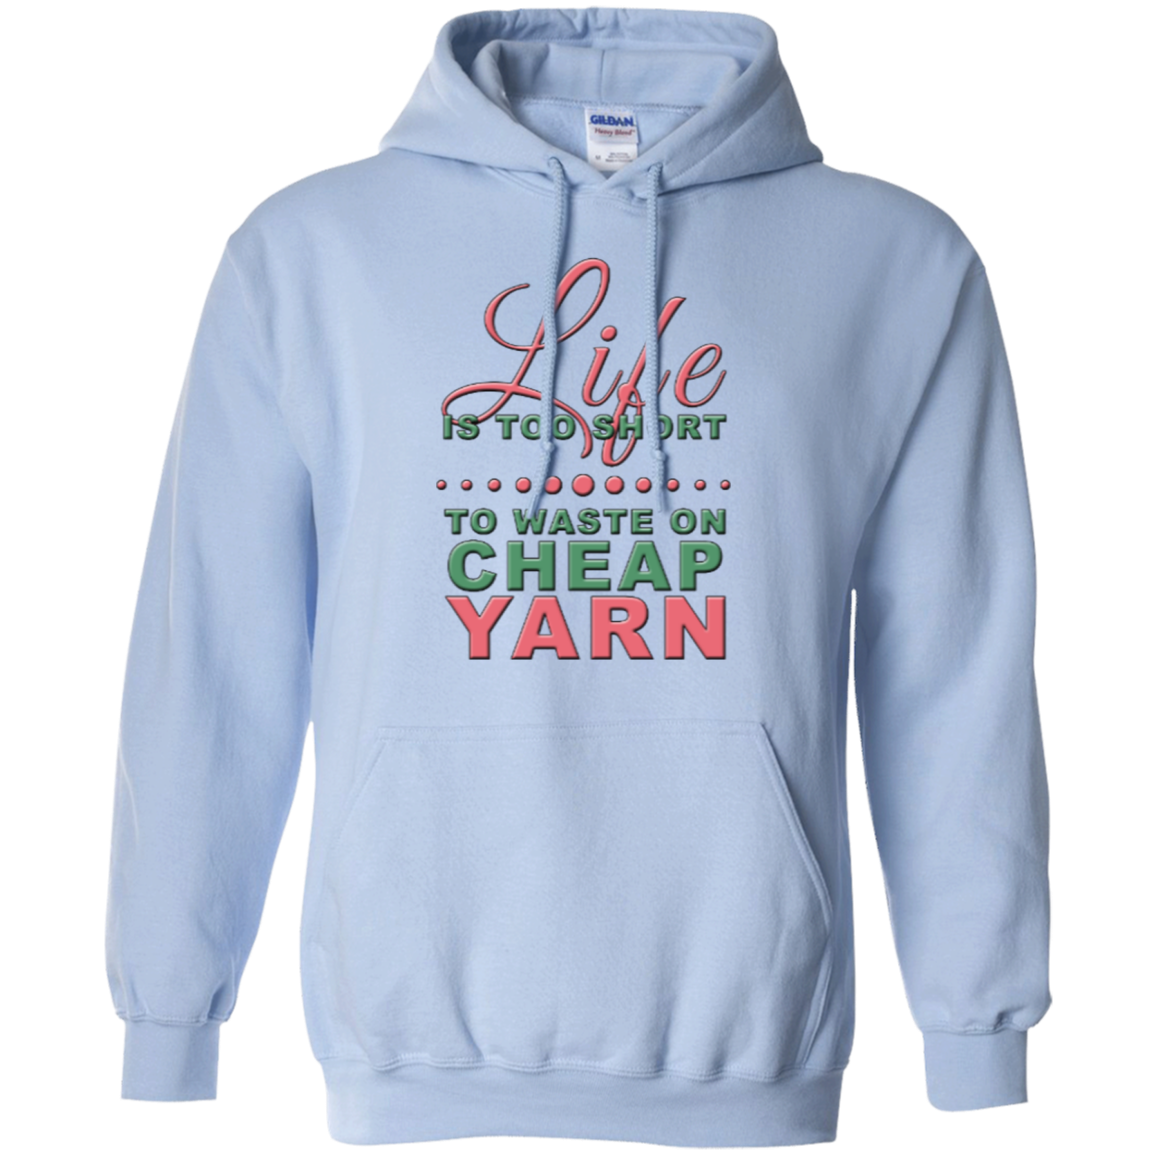 Life is Too Short to Use Cheap Yarn Pullover Hoodies - Crafter4Life - 1